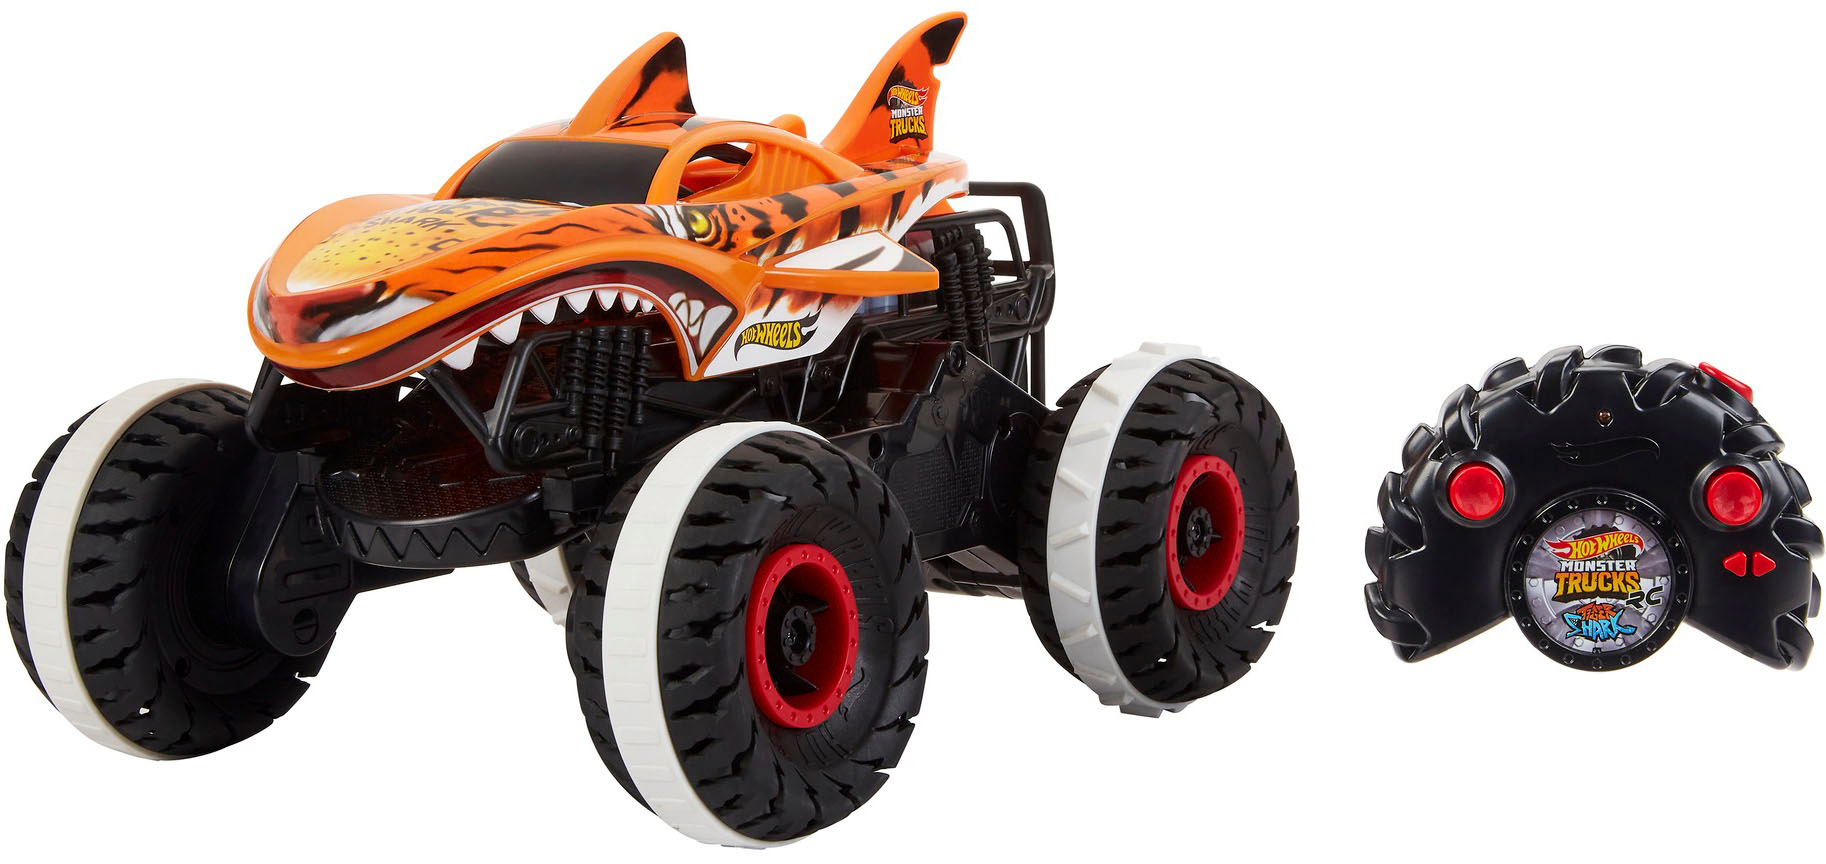 Angle View: Hot Wheels - Monster Truck Unstoppable Tiger Shark Remote Control Vehicle